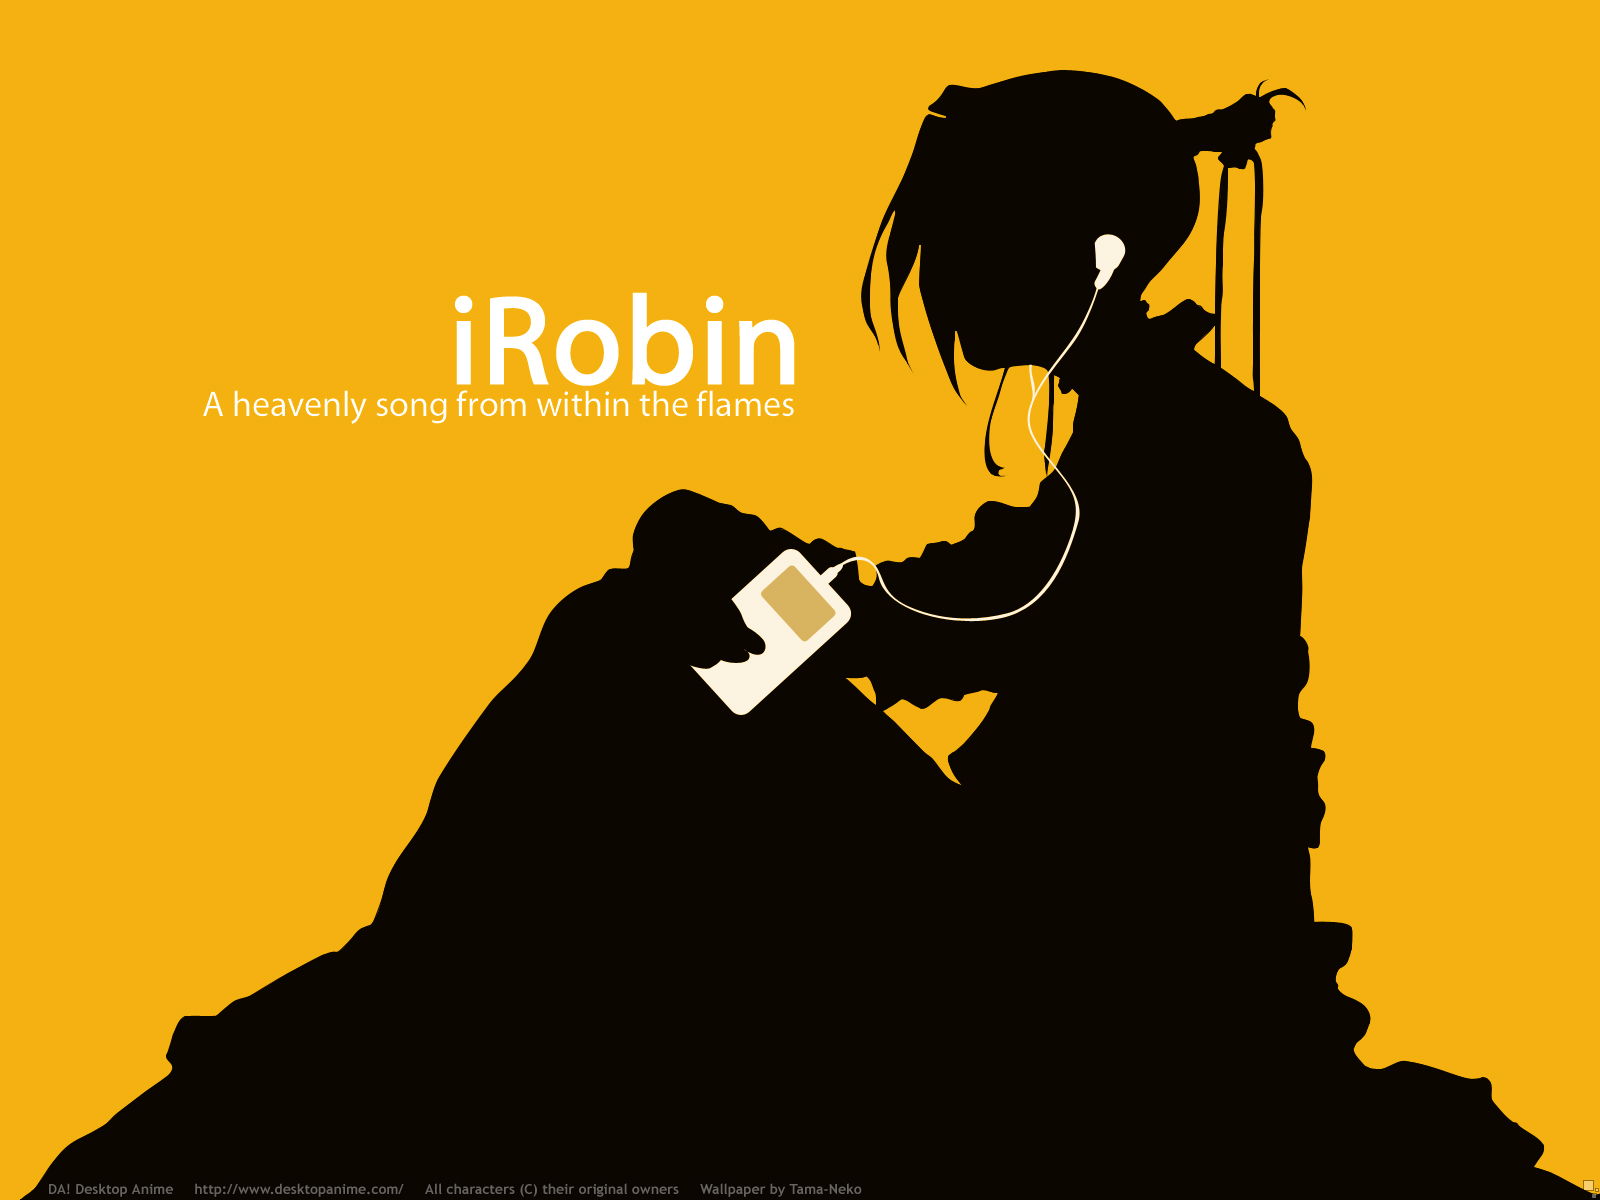 Anime Witch Hunter Robin HD Wallpaper | Background Image